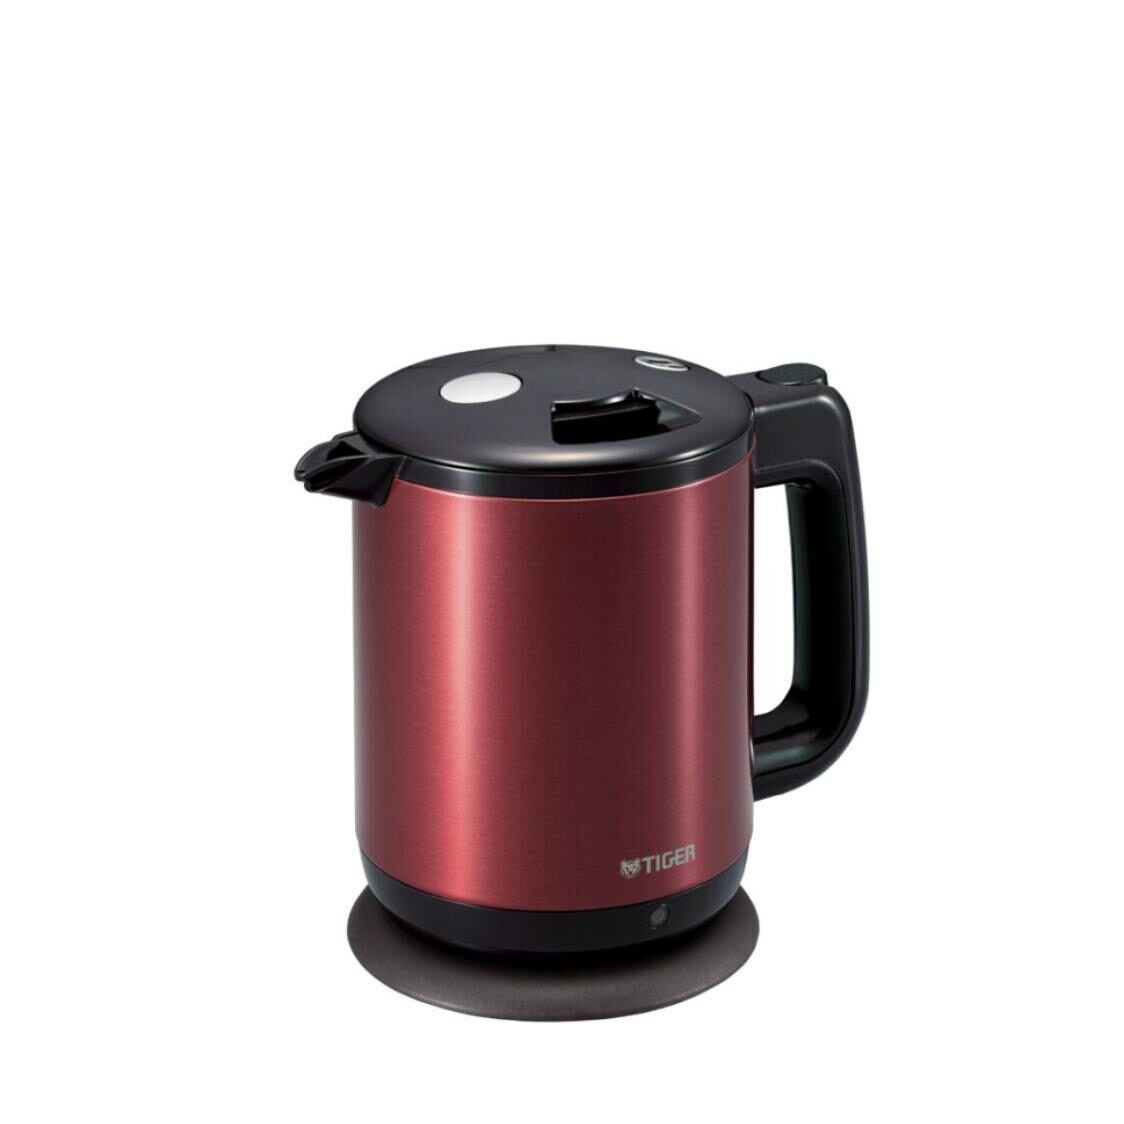 Tiger 10 L Electric Kettle - Brown